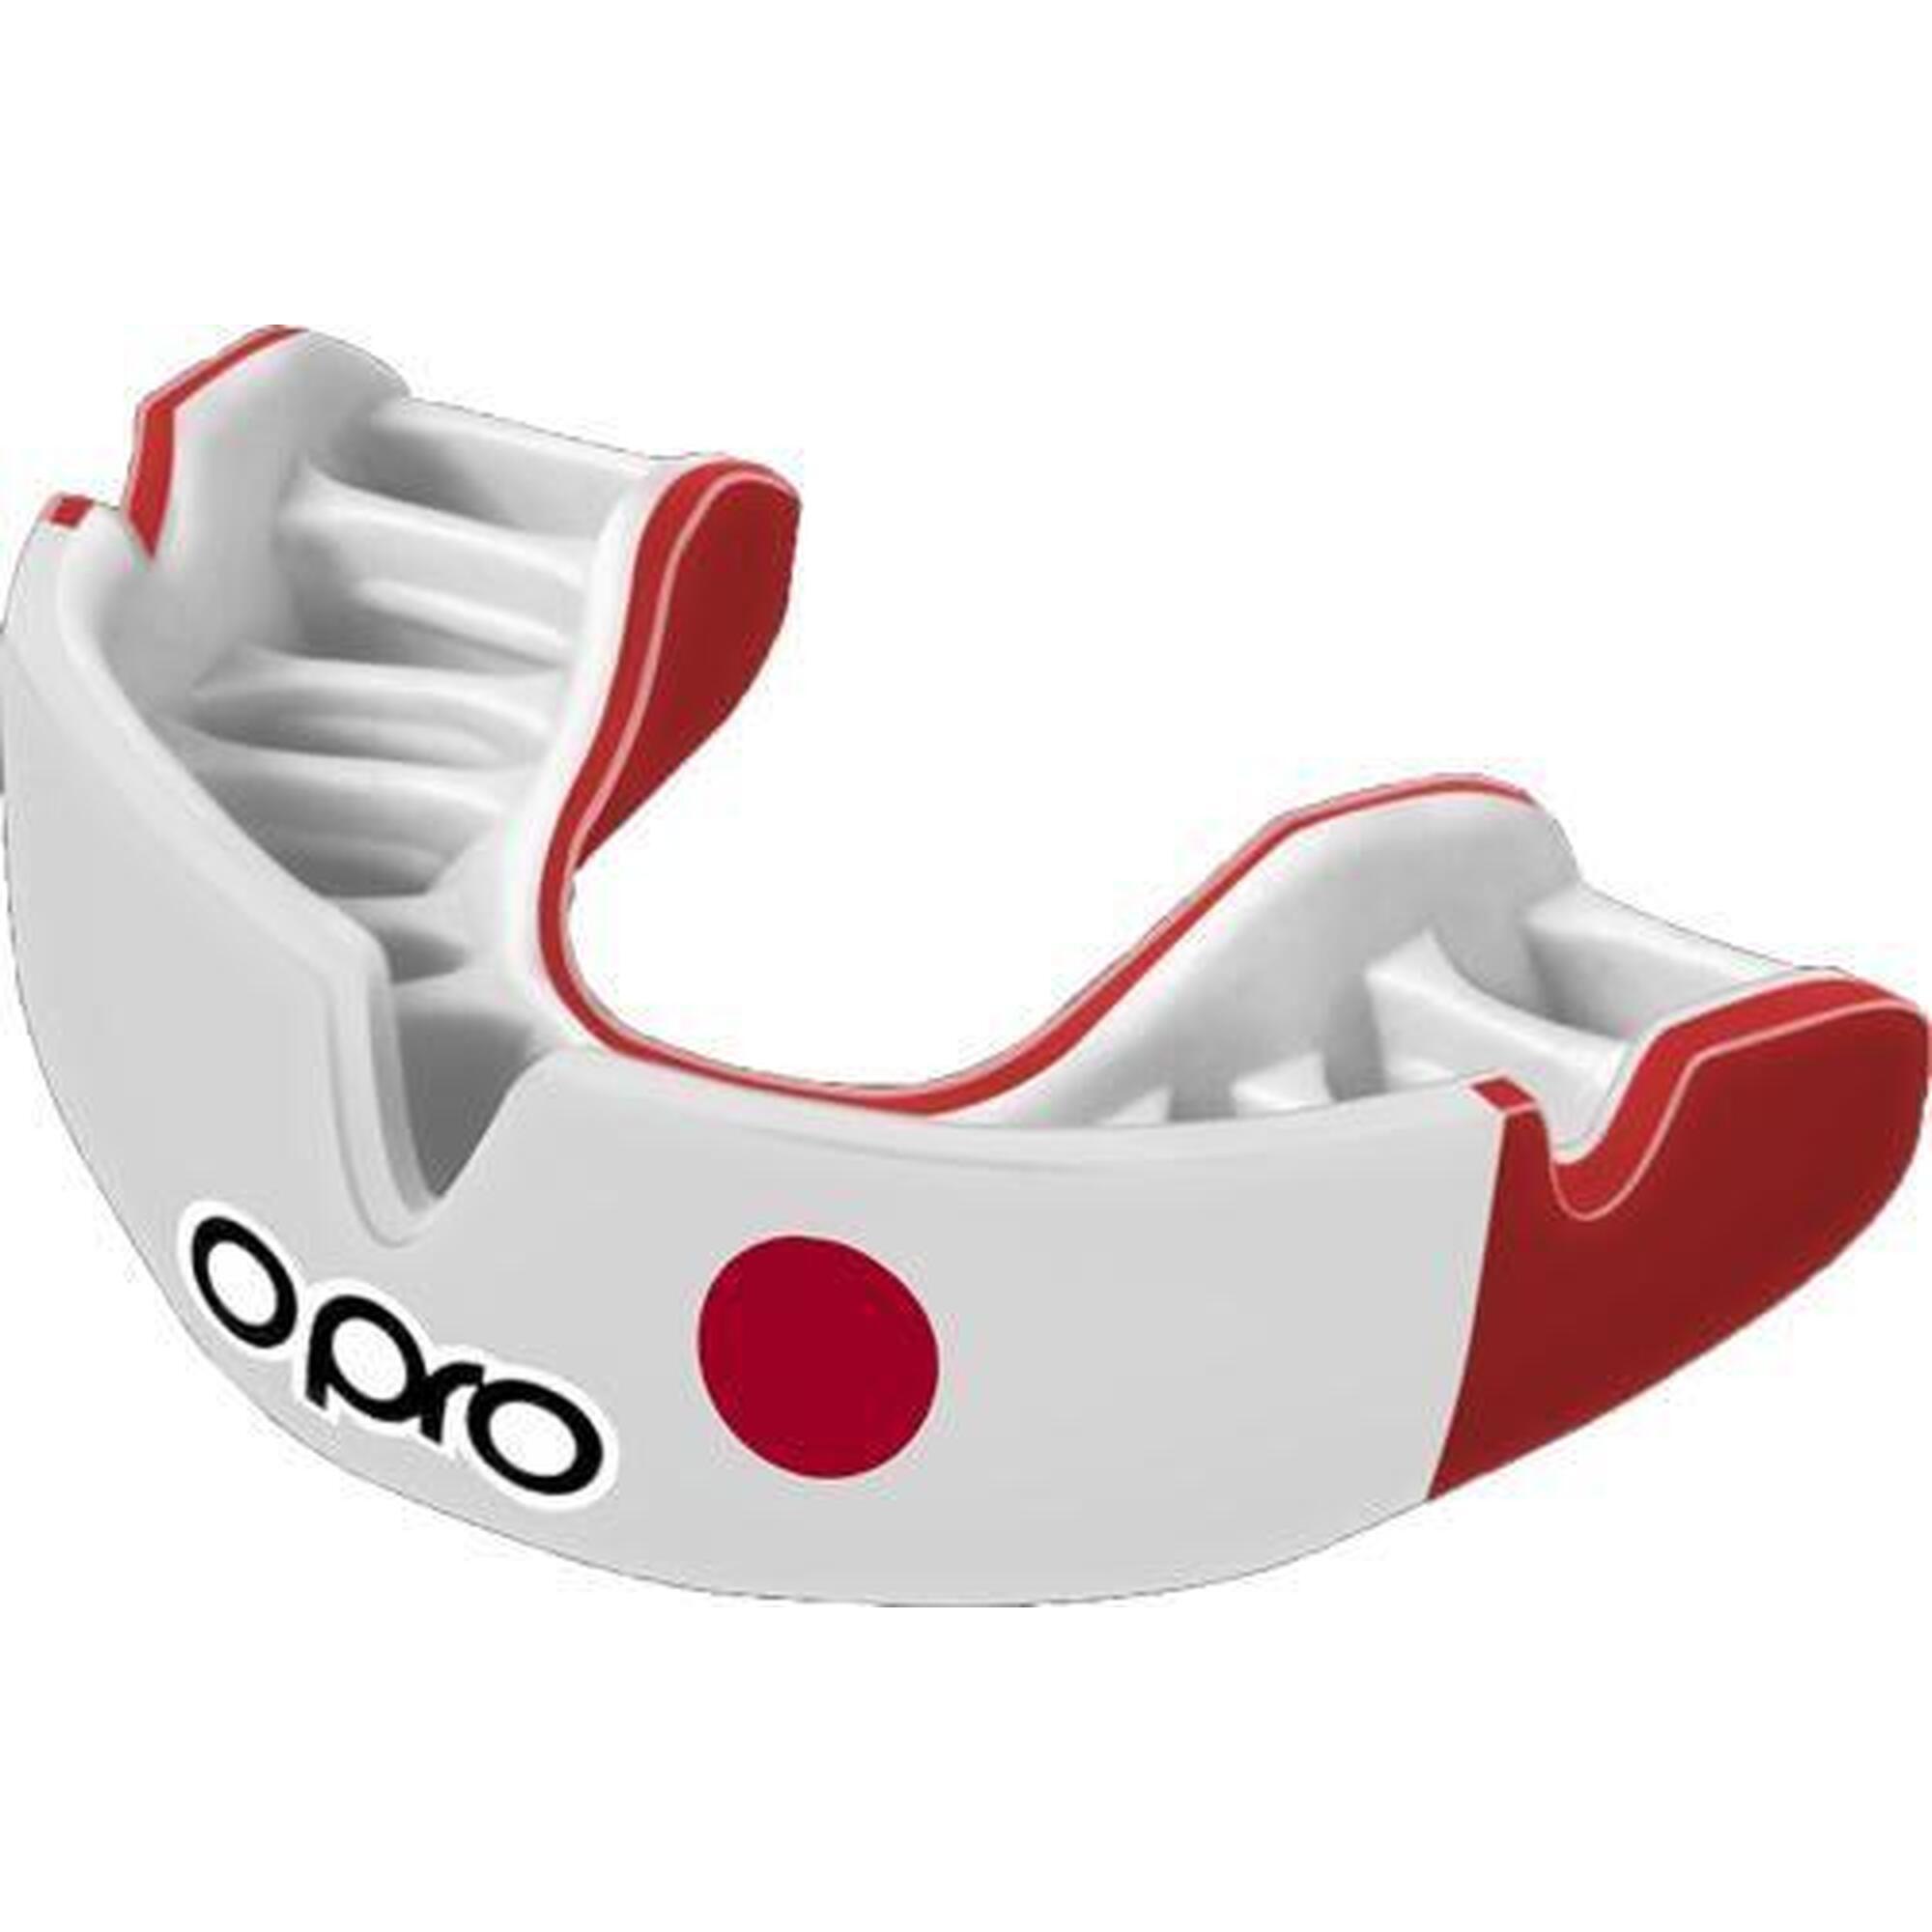 Power Fit Mouthguard - China Flag